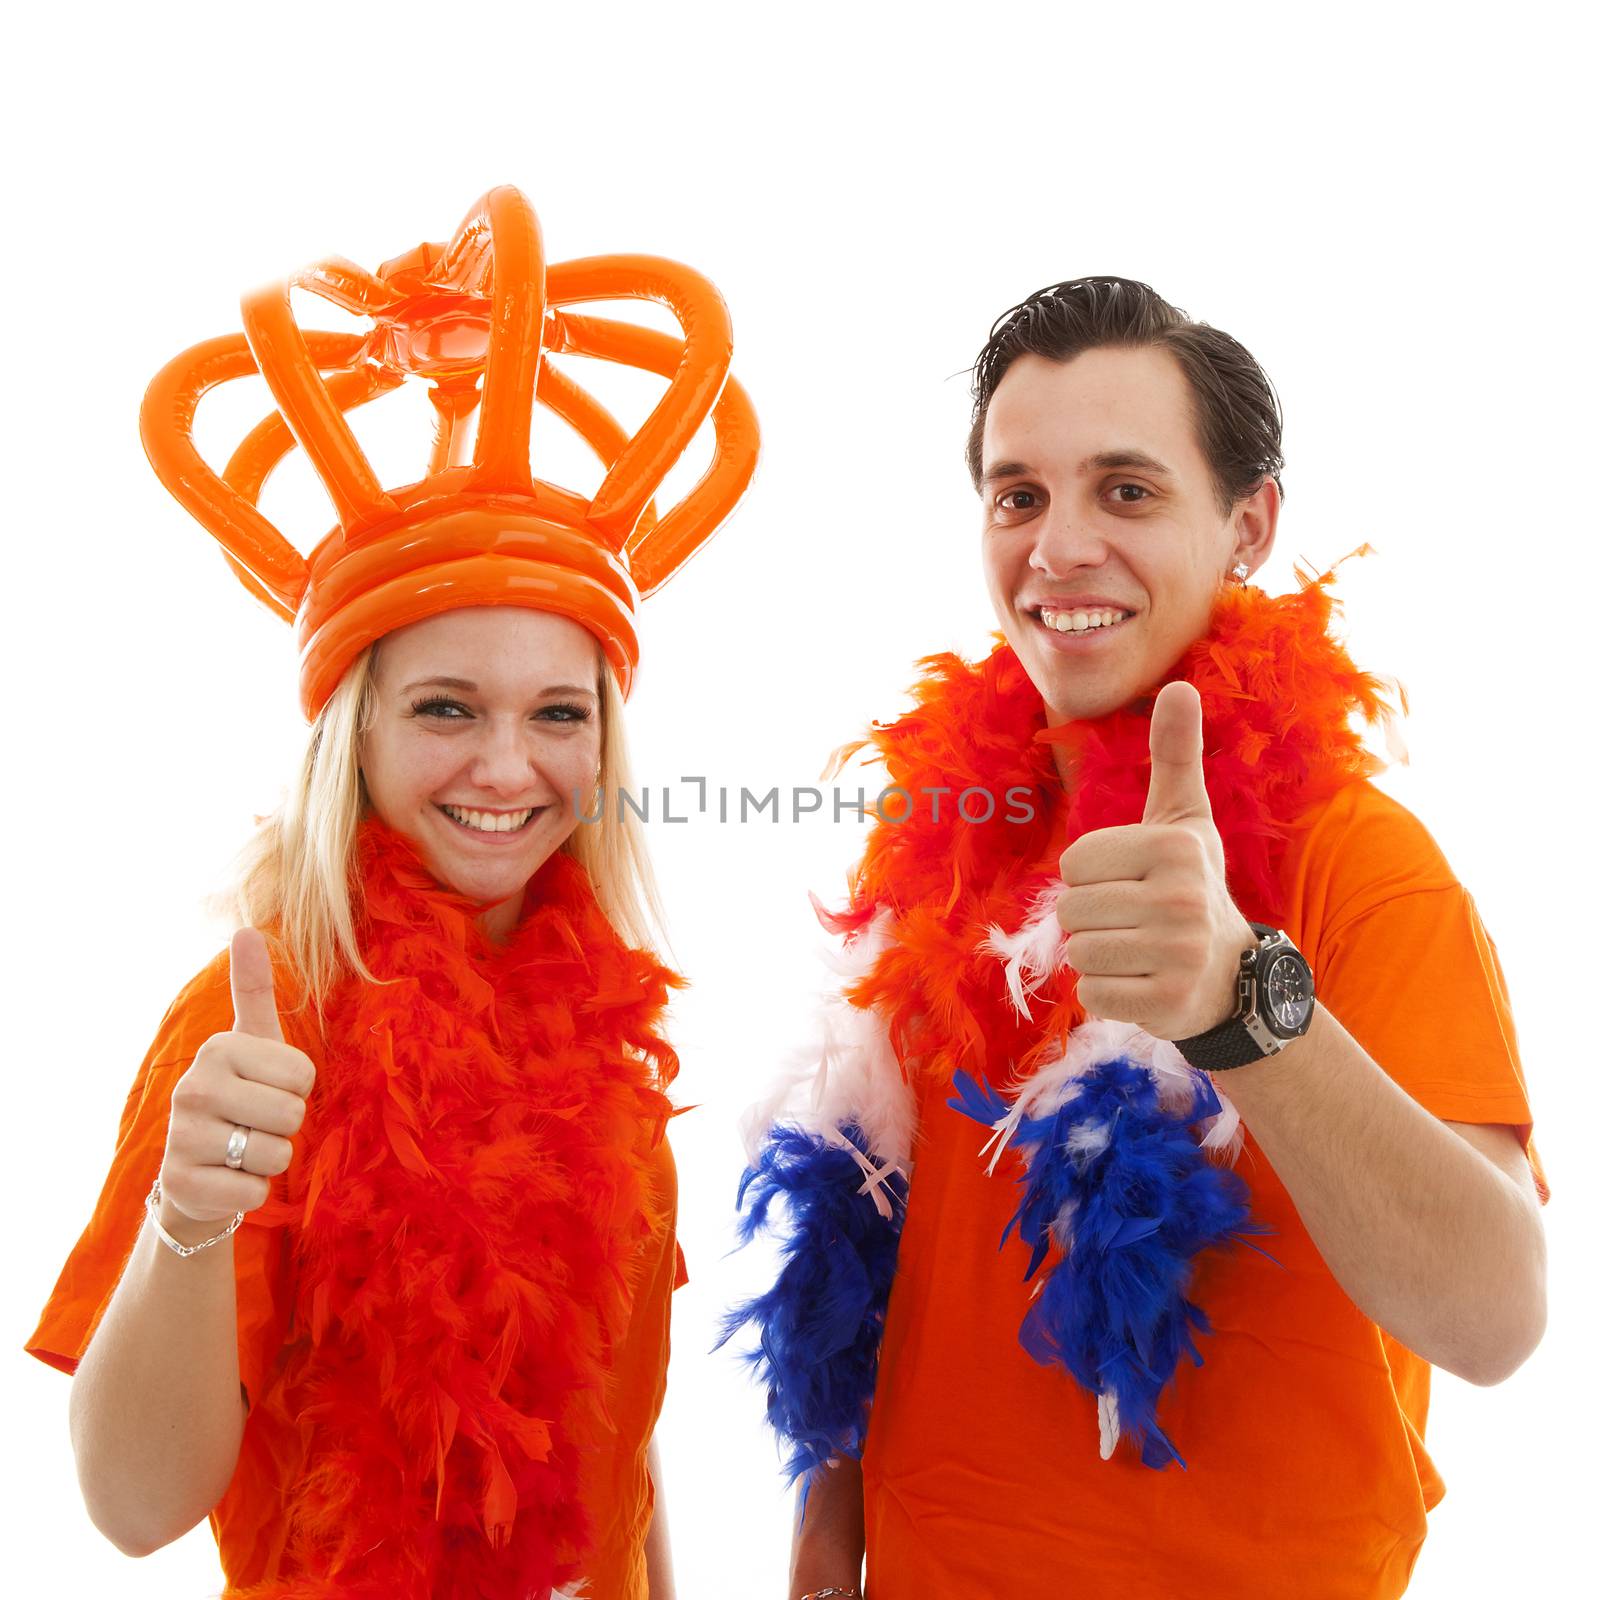 Couple of Dutch soccer supporters by sannie32